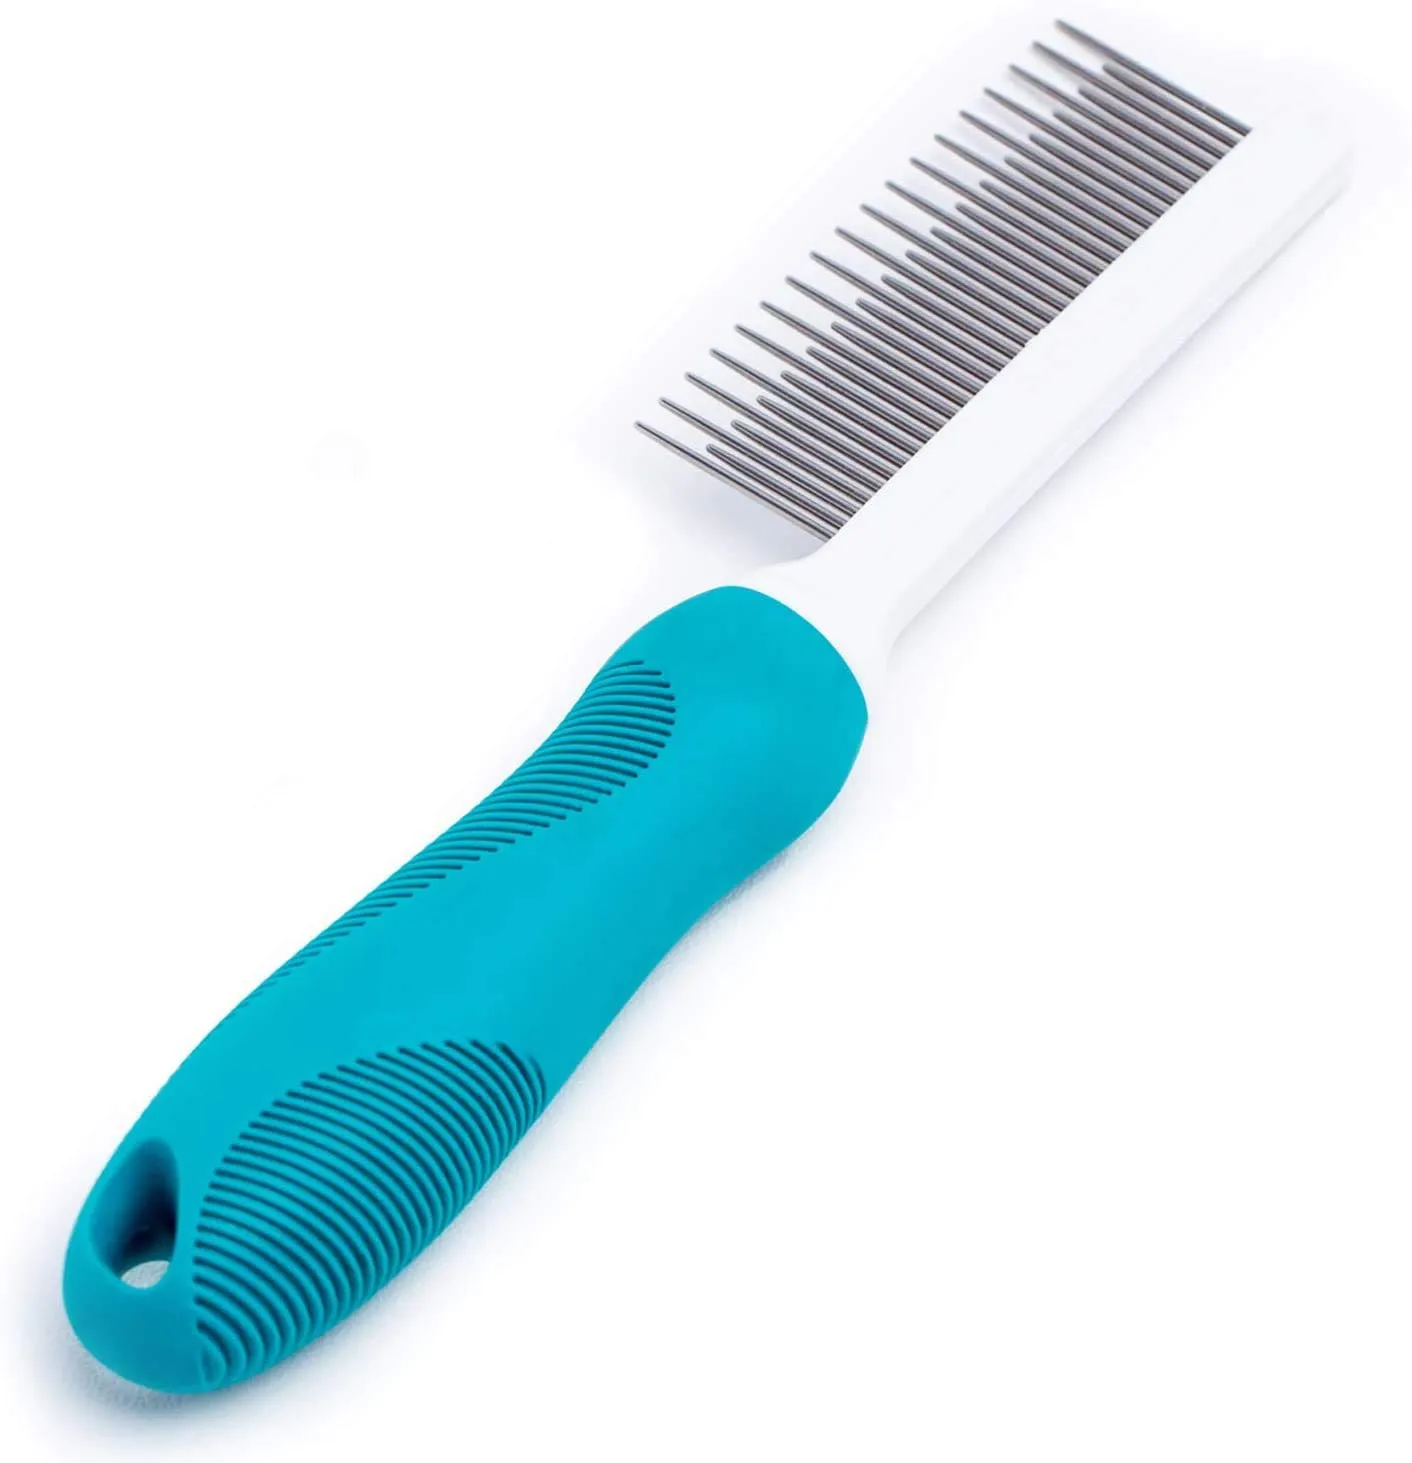 Pet Detangling Pet Comb with Long & Short Stainless Steel Teeth for Removing Matted Fur Knots Tangles